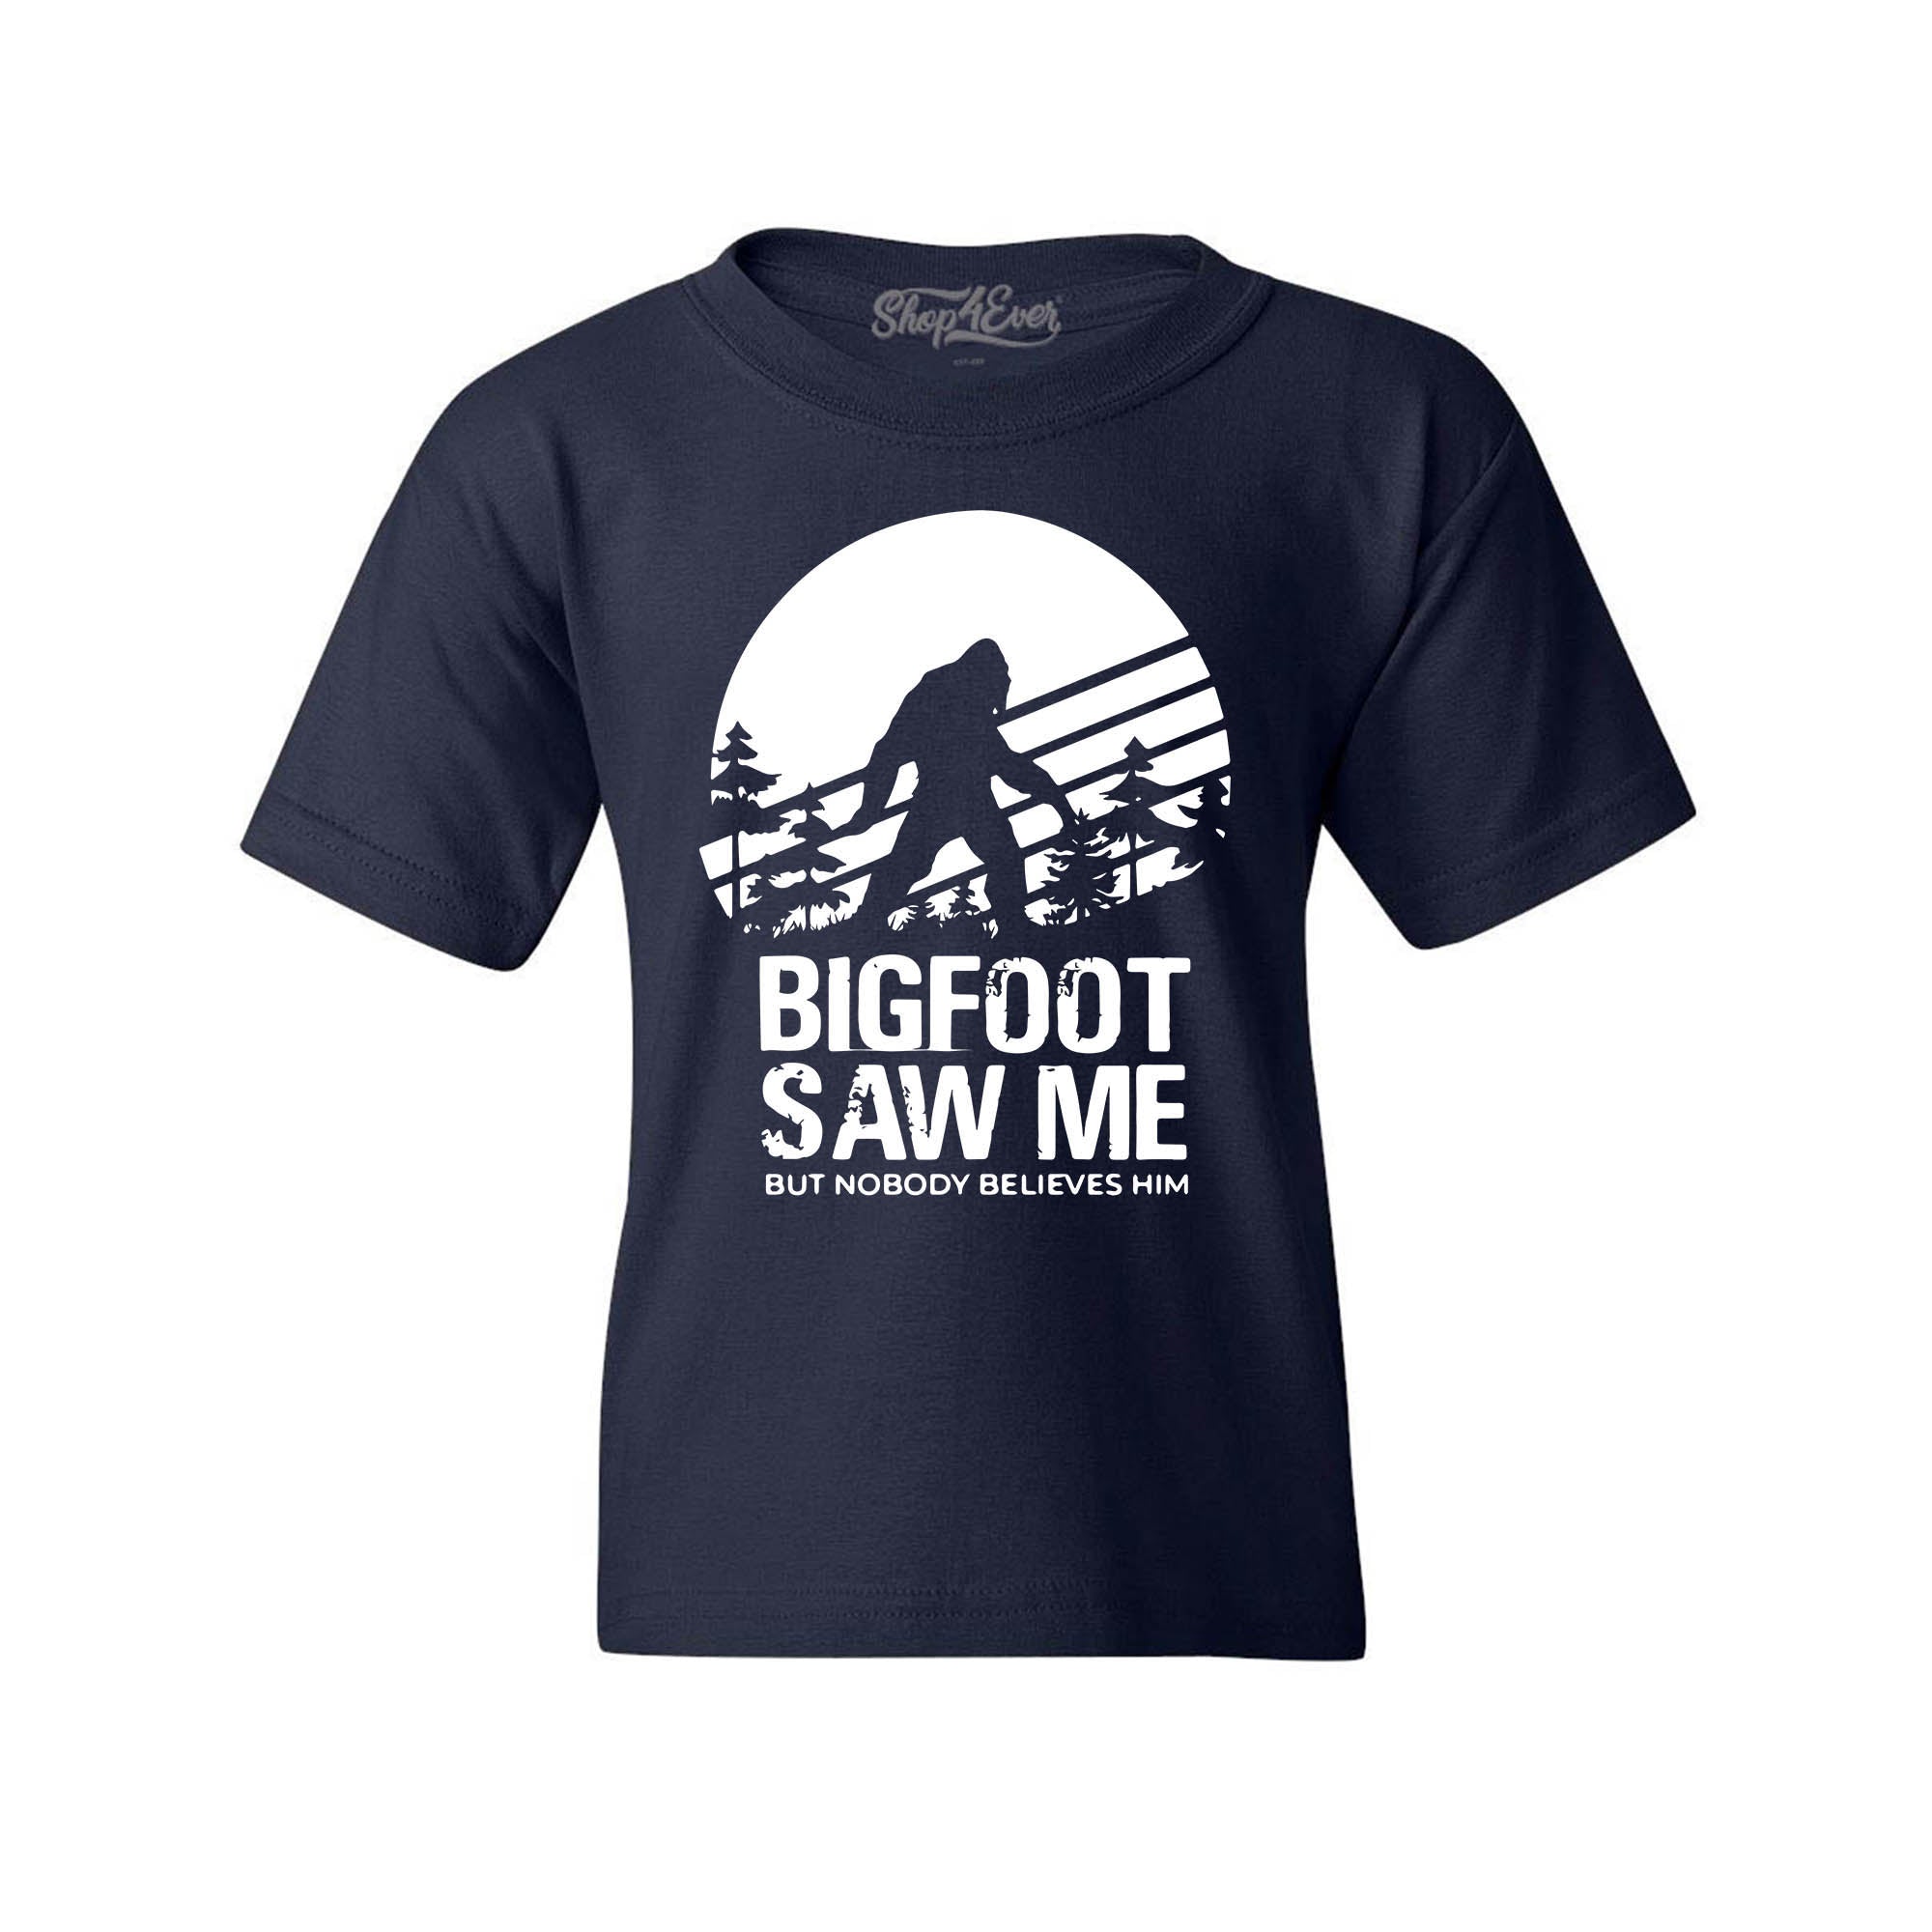 Bigfoot Saw Me But Nobody Believes Him Kids Child Tee Youth's T-Shirt